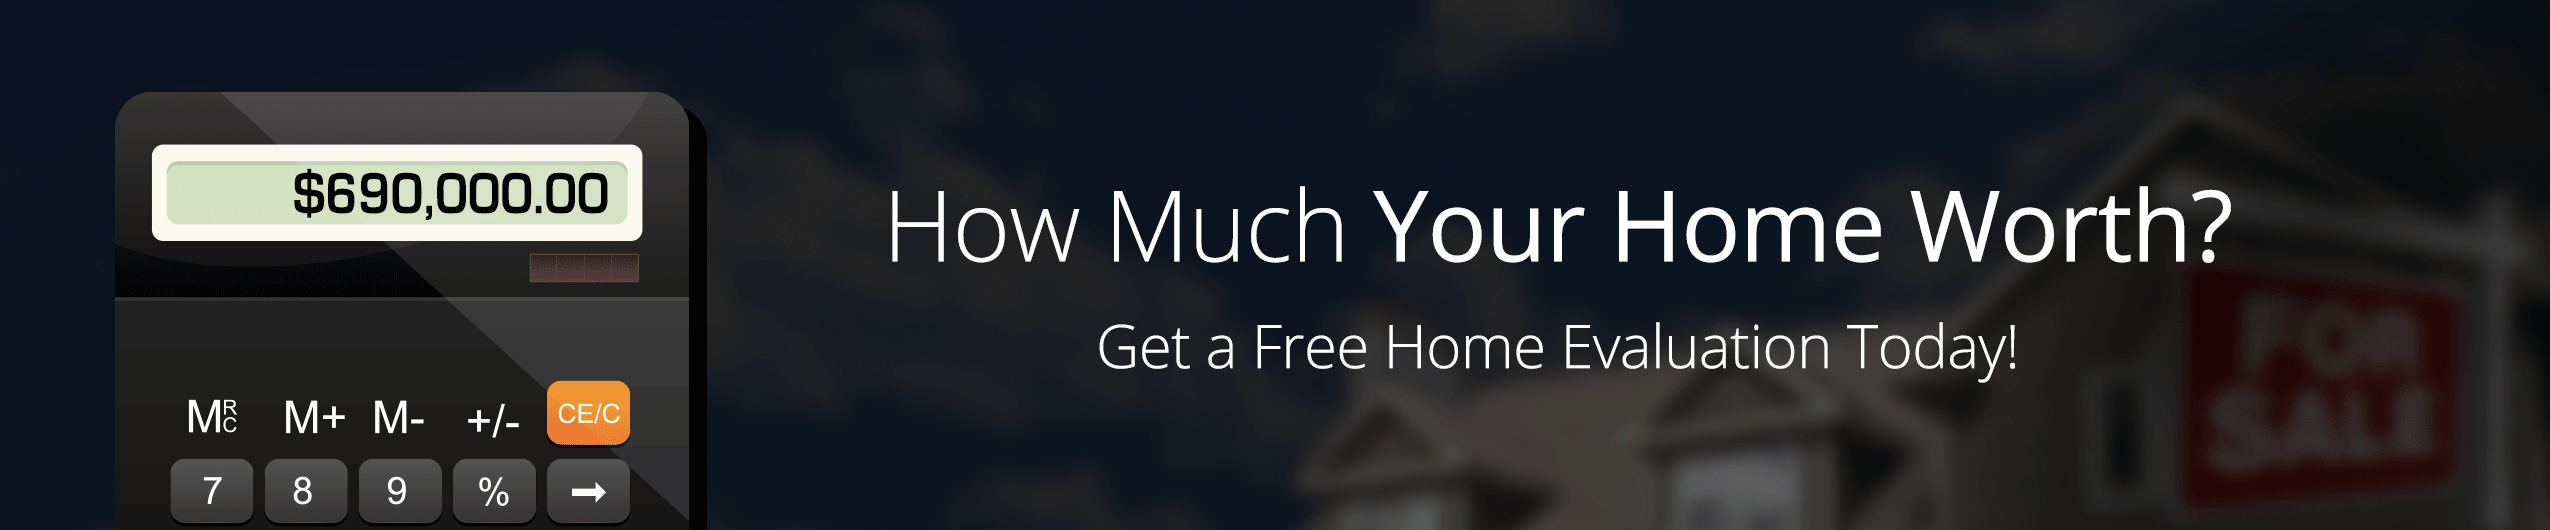 How much your home worth